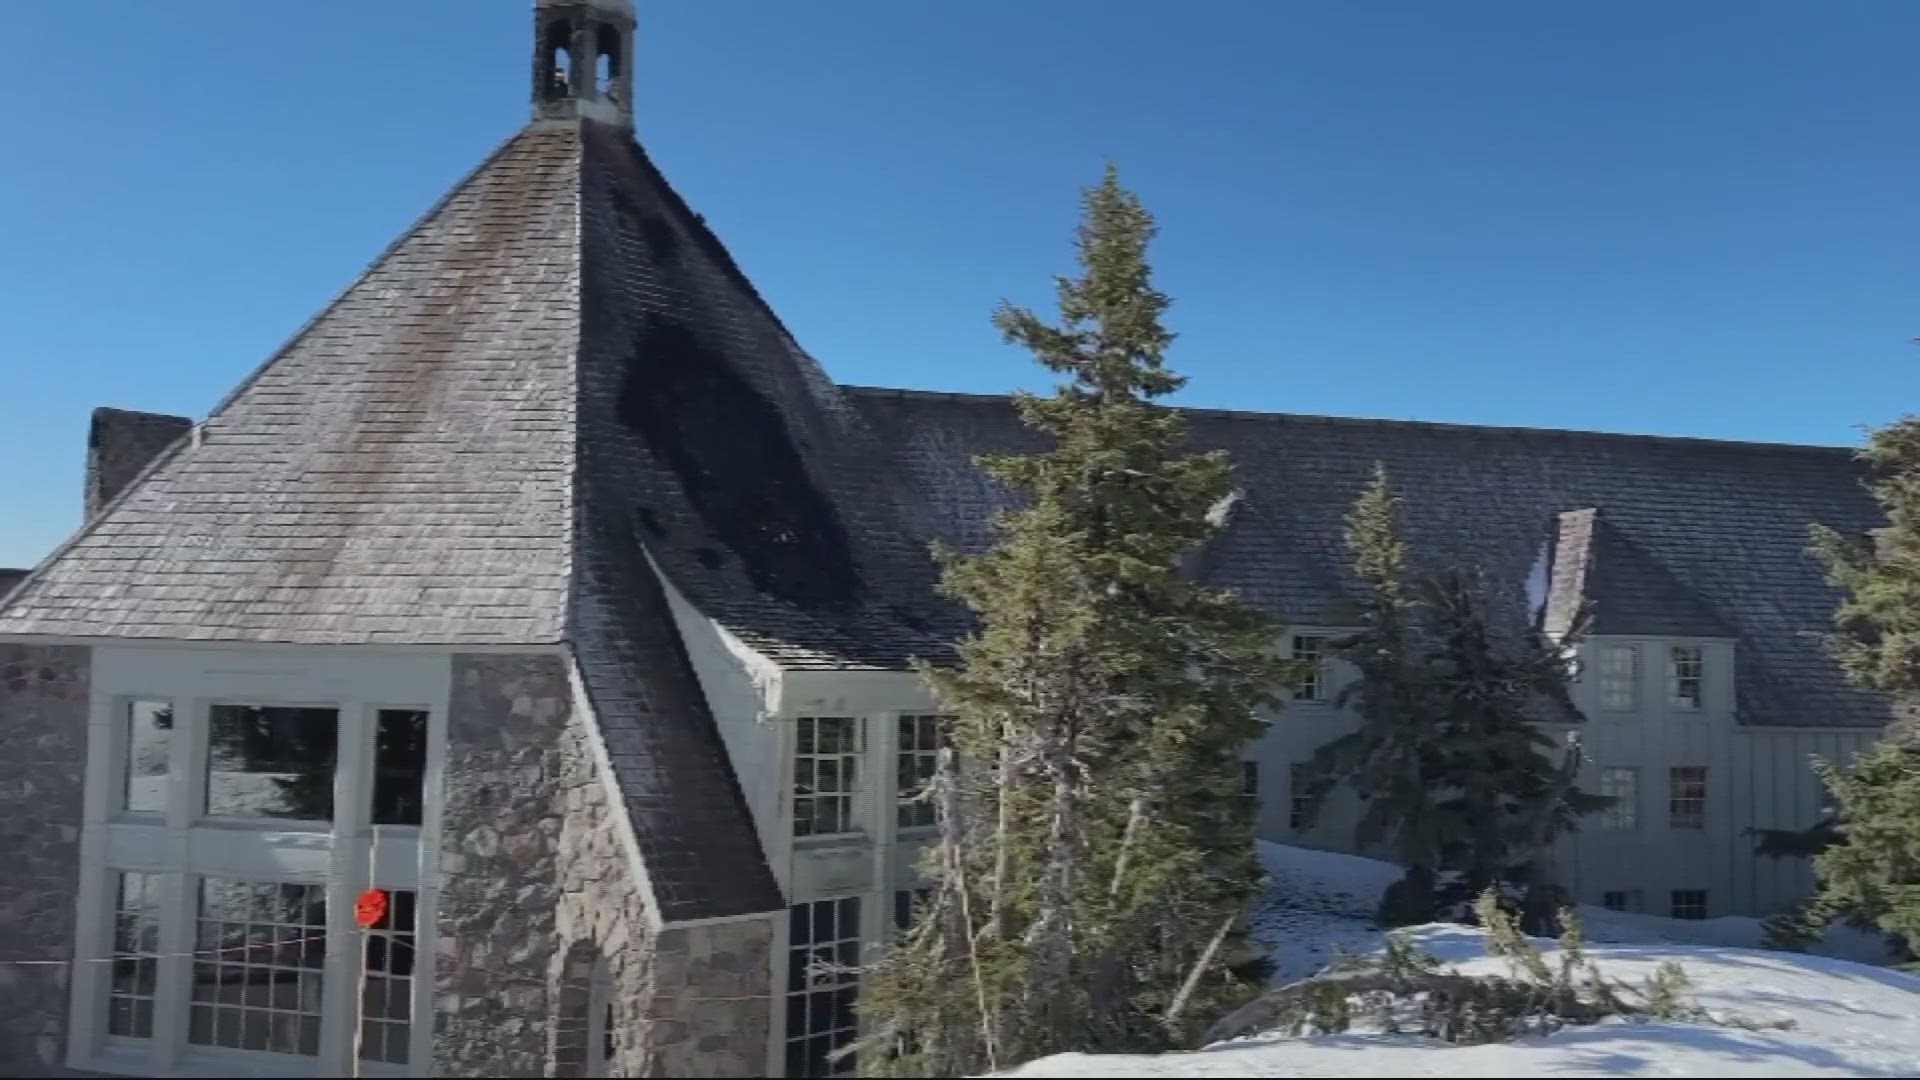 The historic Timberline Lodge building remains closed for repairs, but breakfast service and slopes will be open for guests.